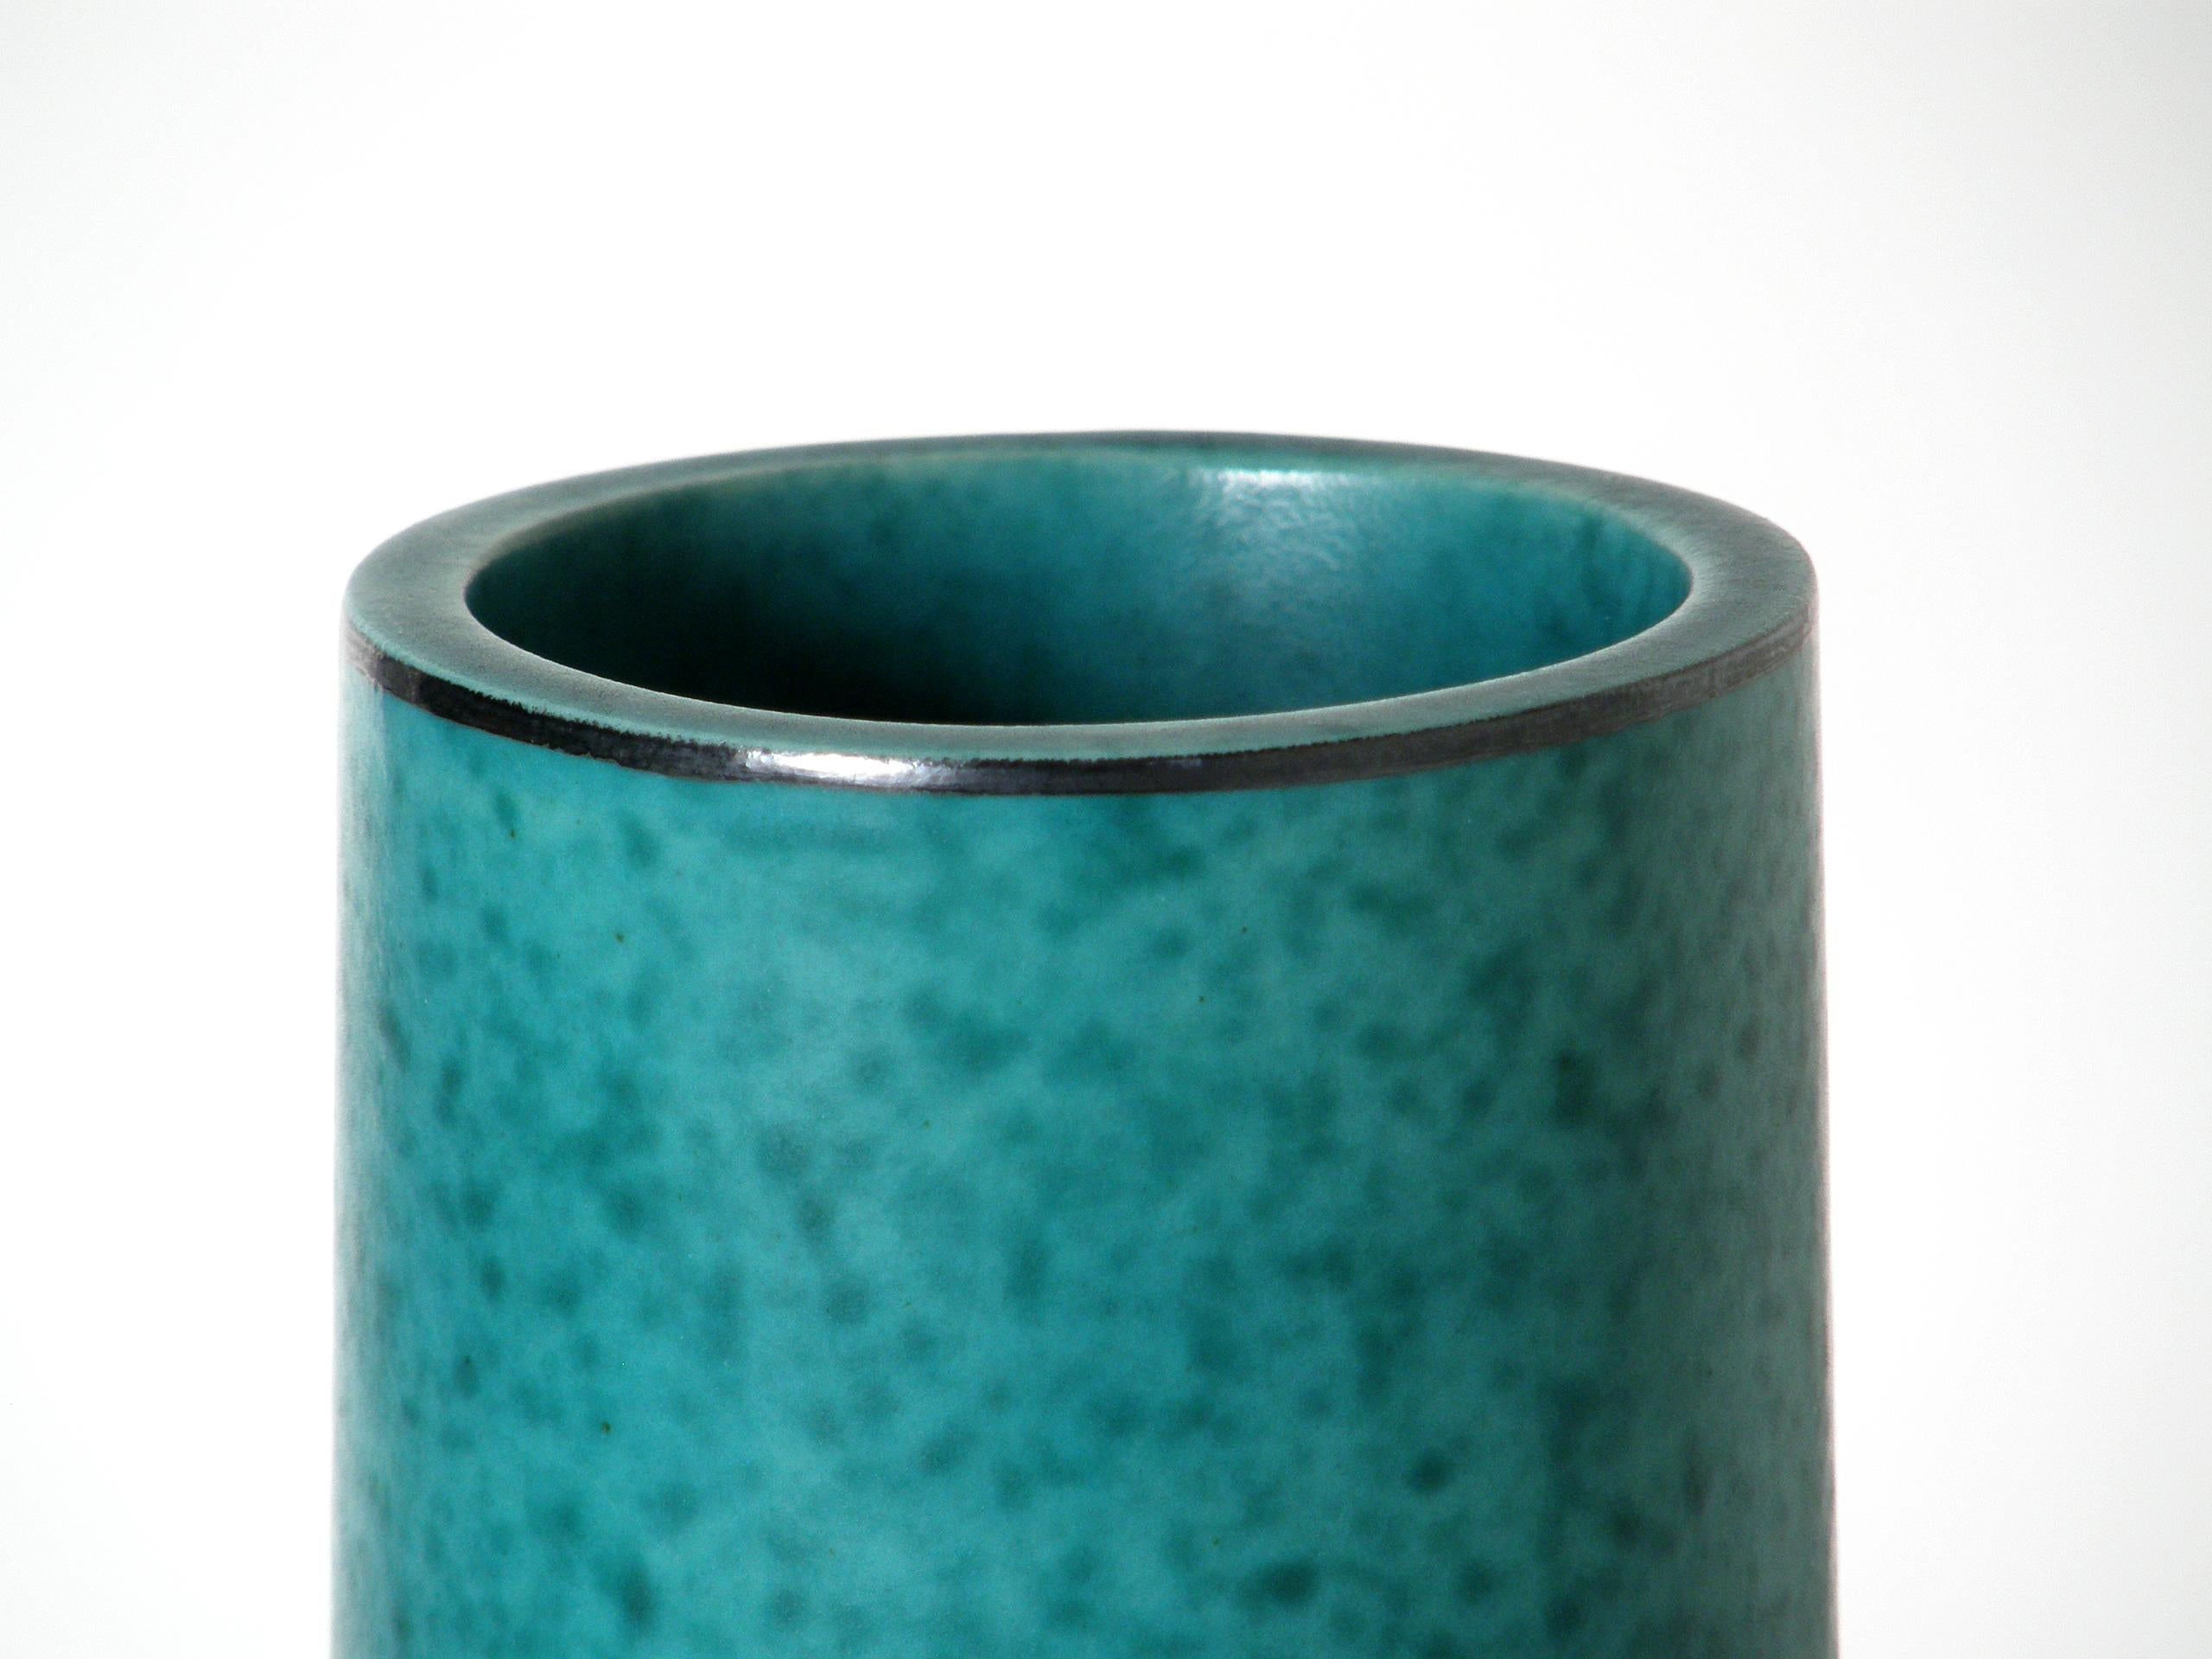 This classically elegant, columnar form ceramic vase is from Wilhelm Kåge's Argenta line for Gustavsberg. The mottled green glaze has a satiny finish, a floral silver overlay on the center front, and silver linear accents on the rim and foot.

We